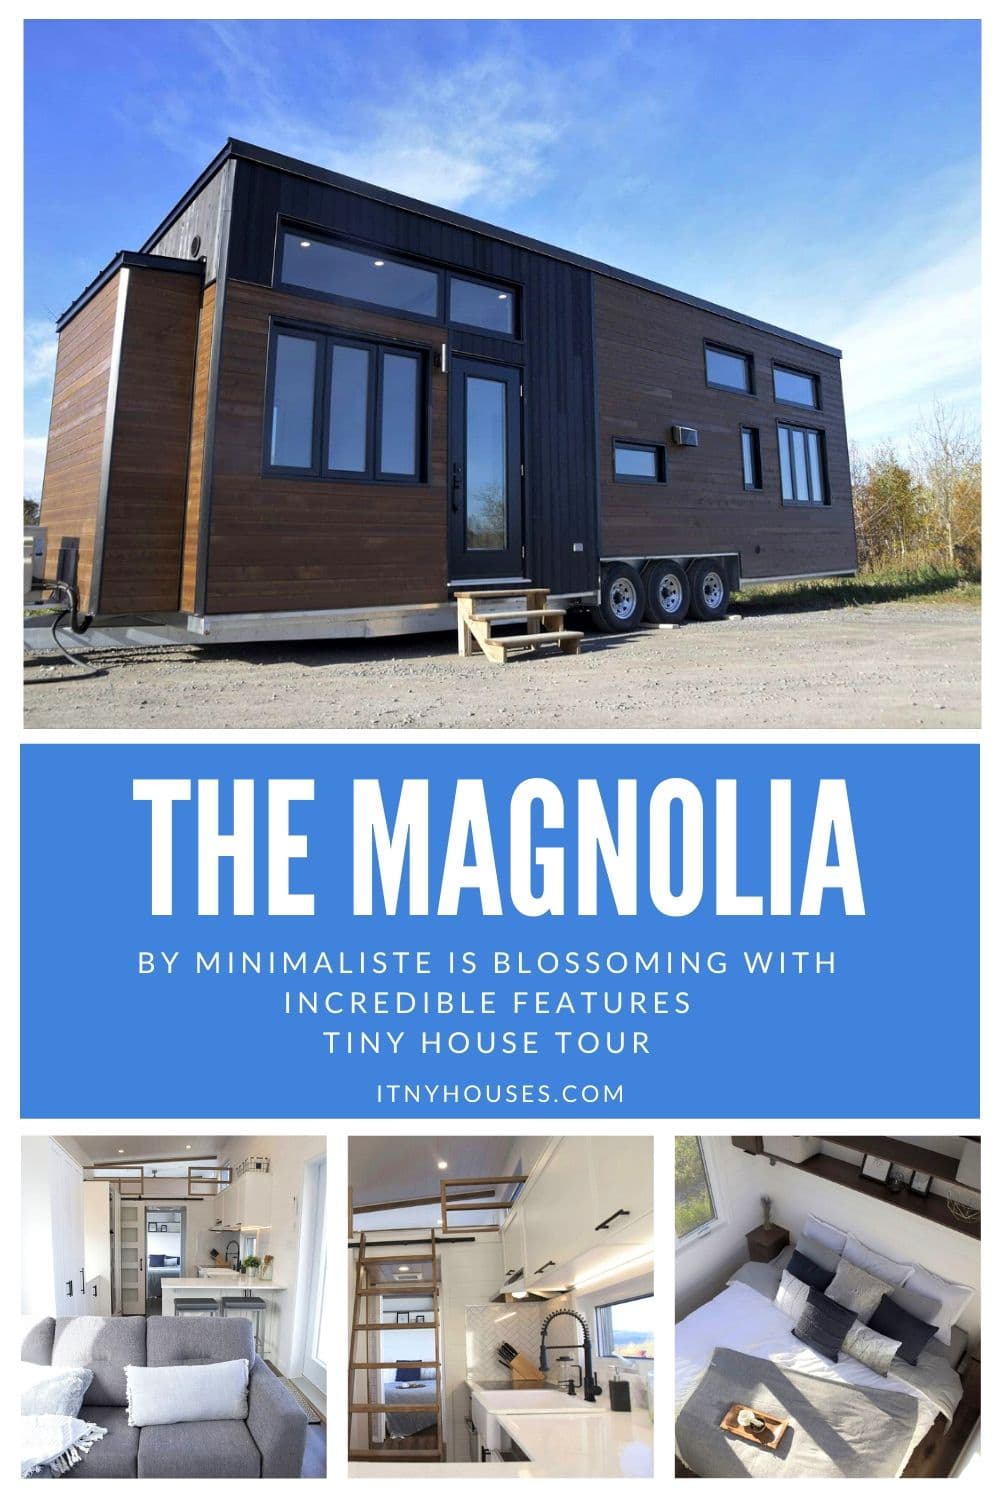 The Magnolia by Minimaliste is Blossoming With Incredible Features